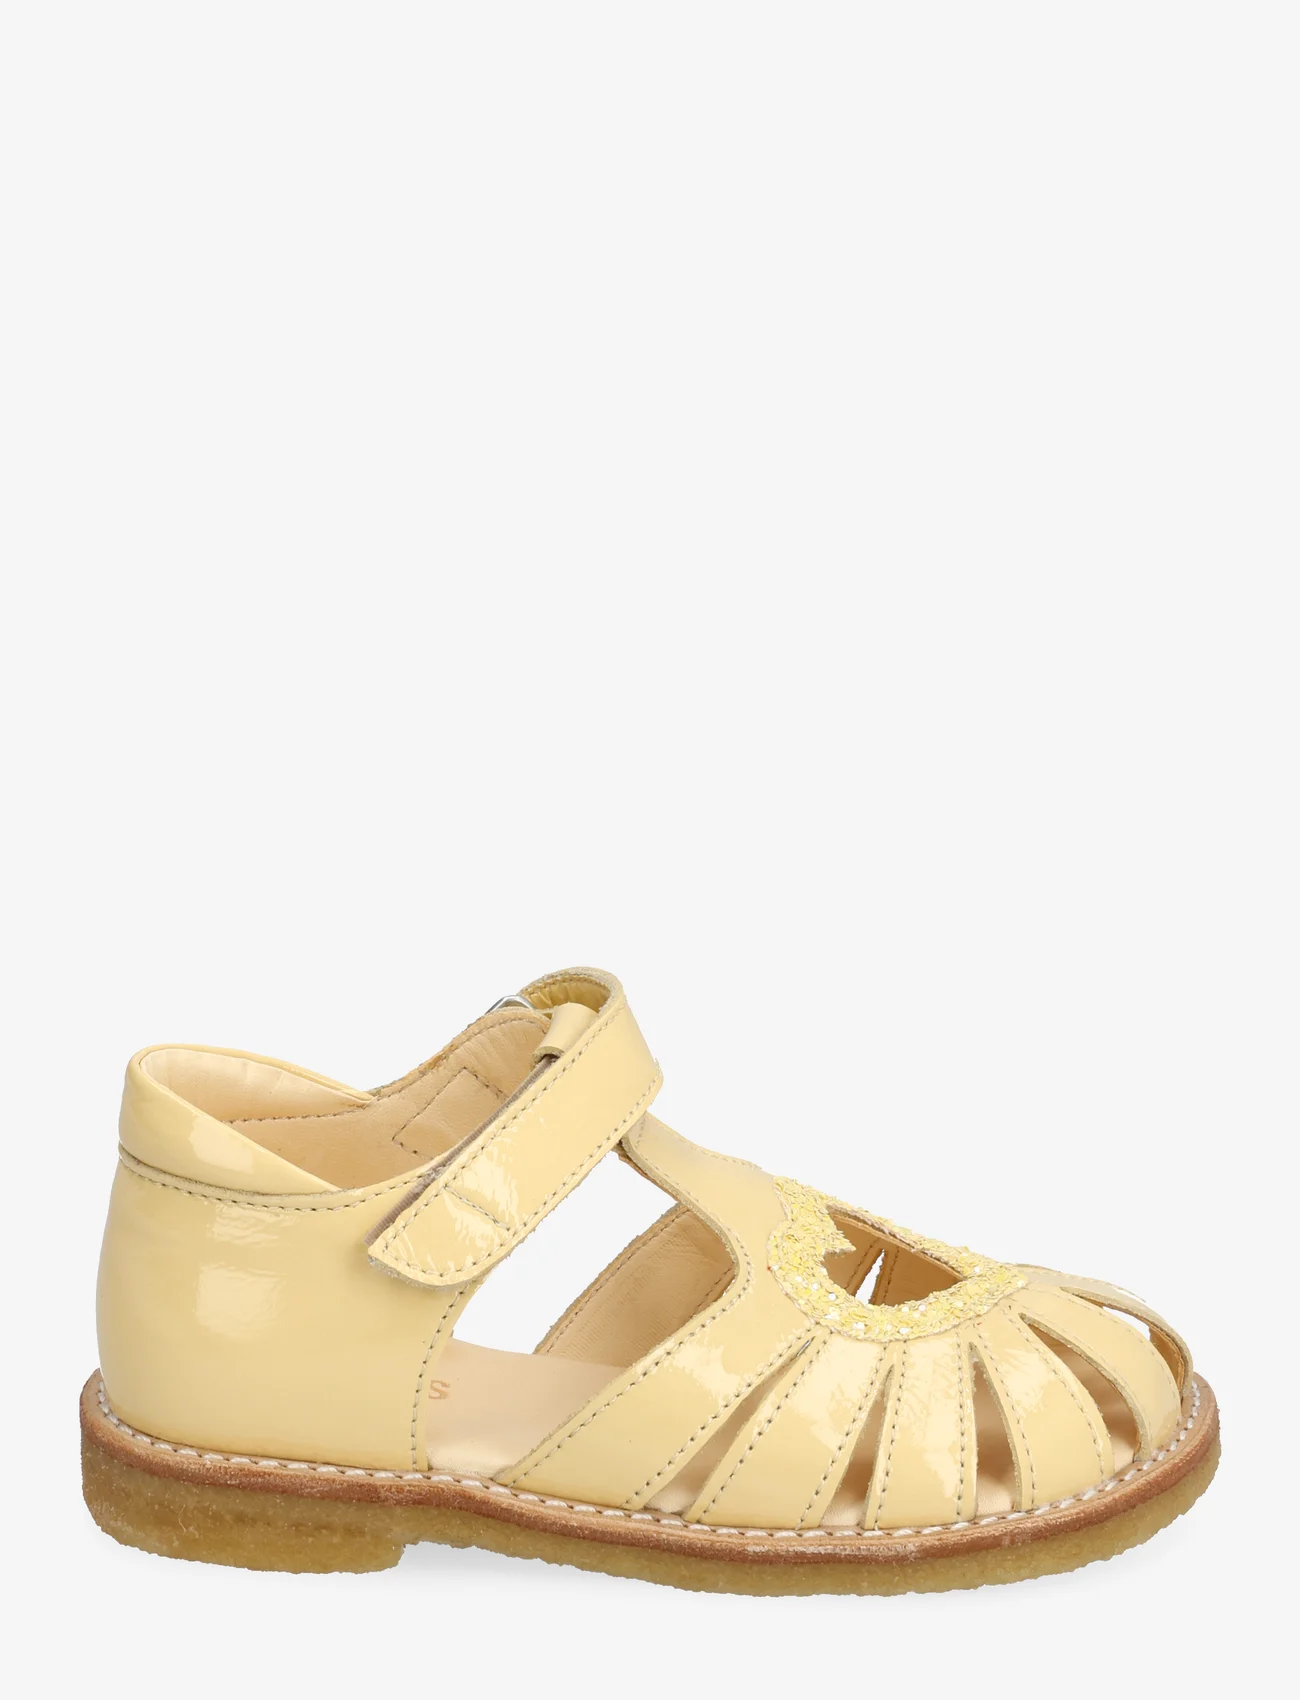 ANGULUS - Sandals - flat - closed toe - - sommarfynd - 2706/2825 mellow yellow/pineap - 1